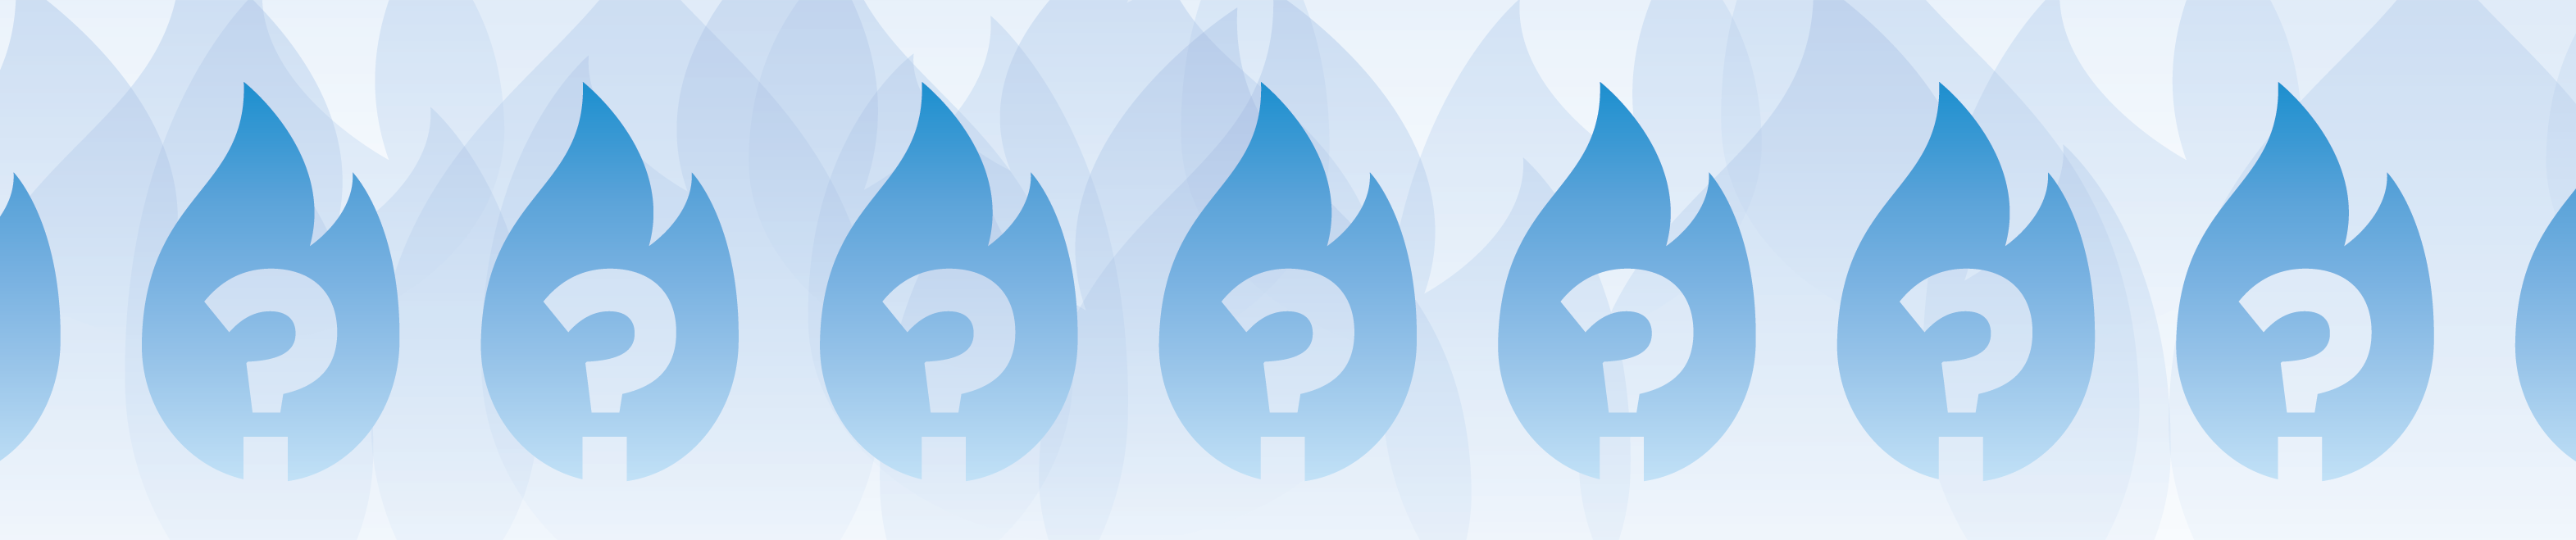 Blue natural gas flames with question marks